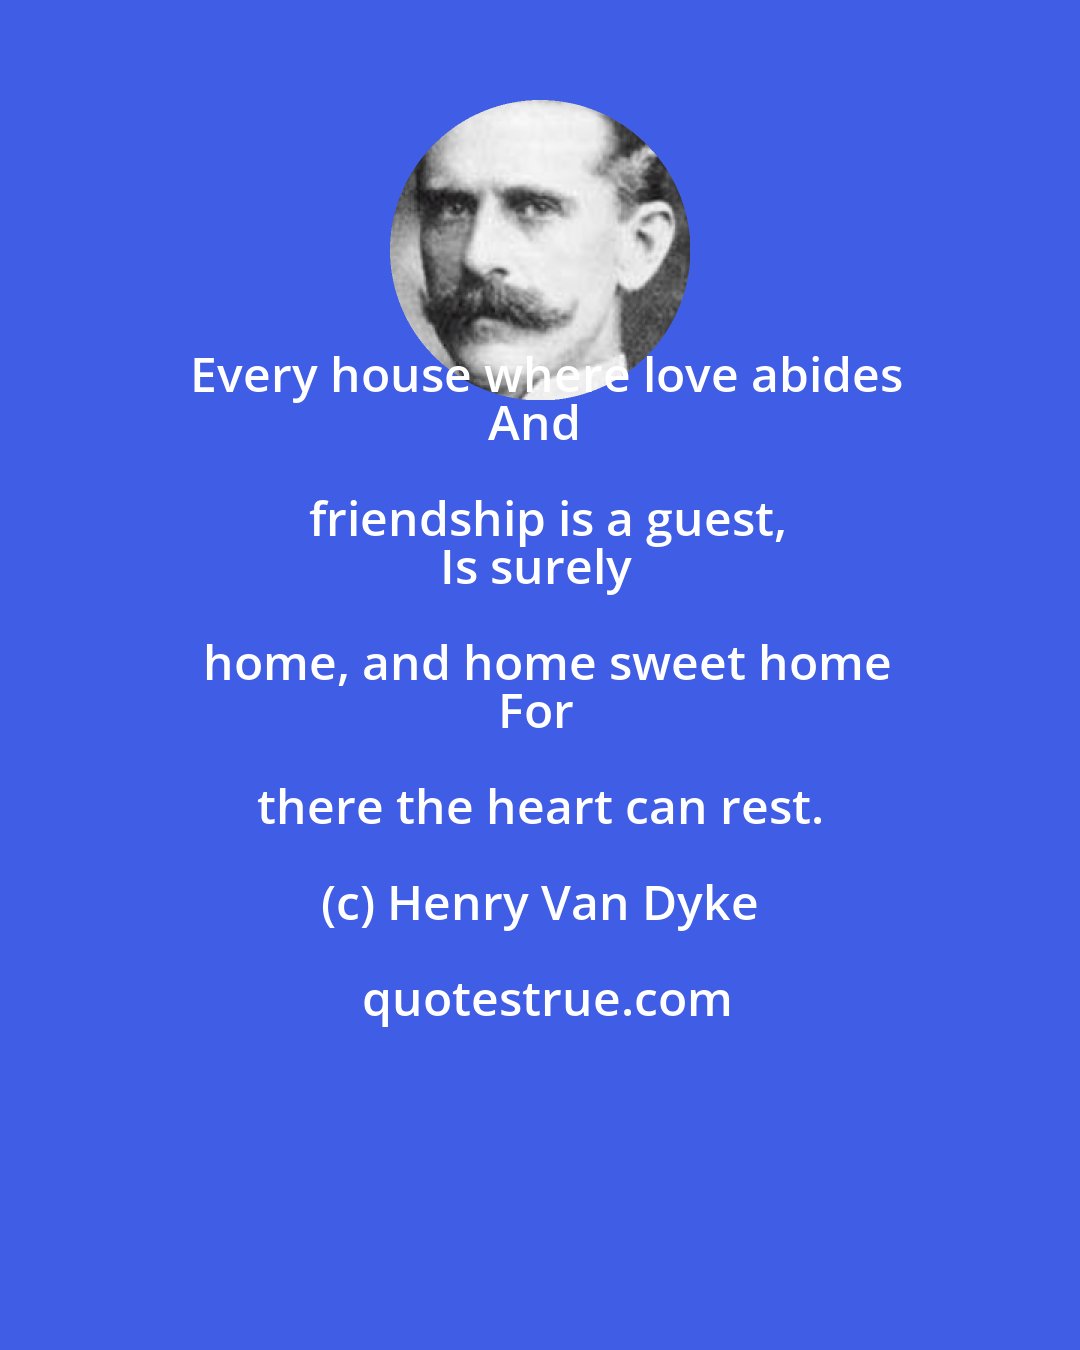 Henry Van Dyke: Every house where love abides
And friendship is a guest,
Is surely home, and home sweet home
For there the heart can rest.